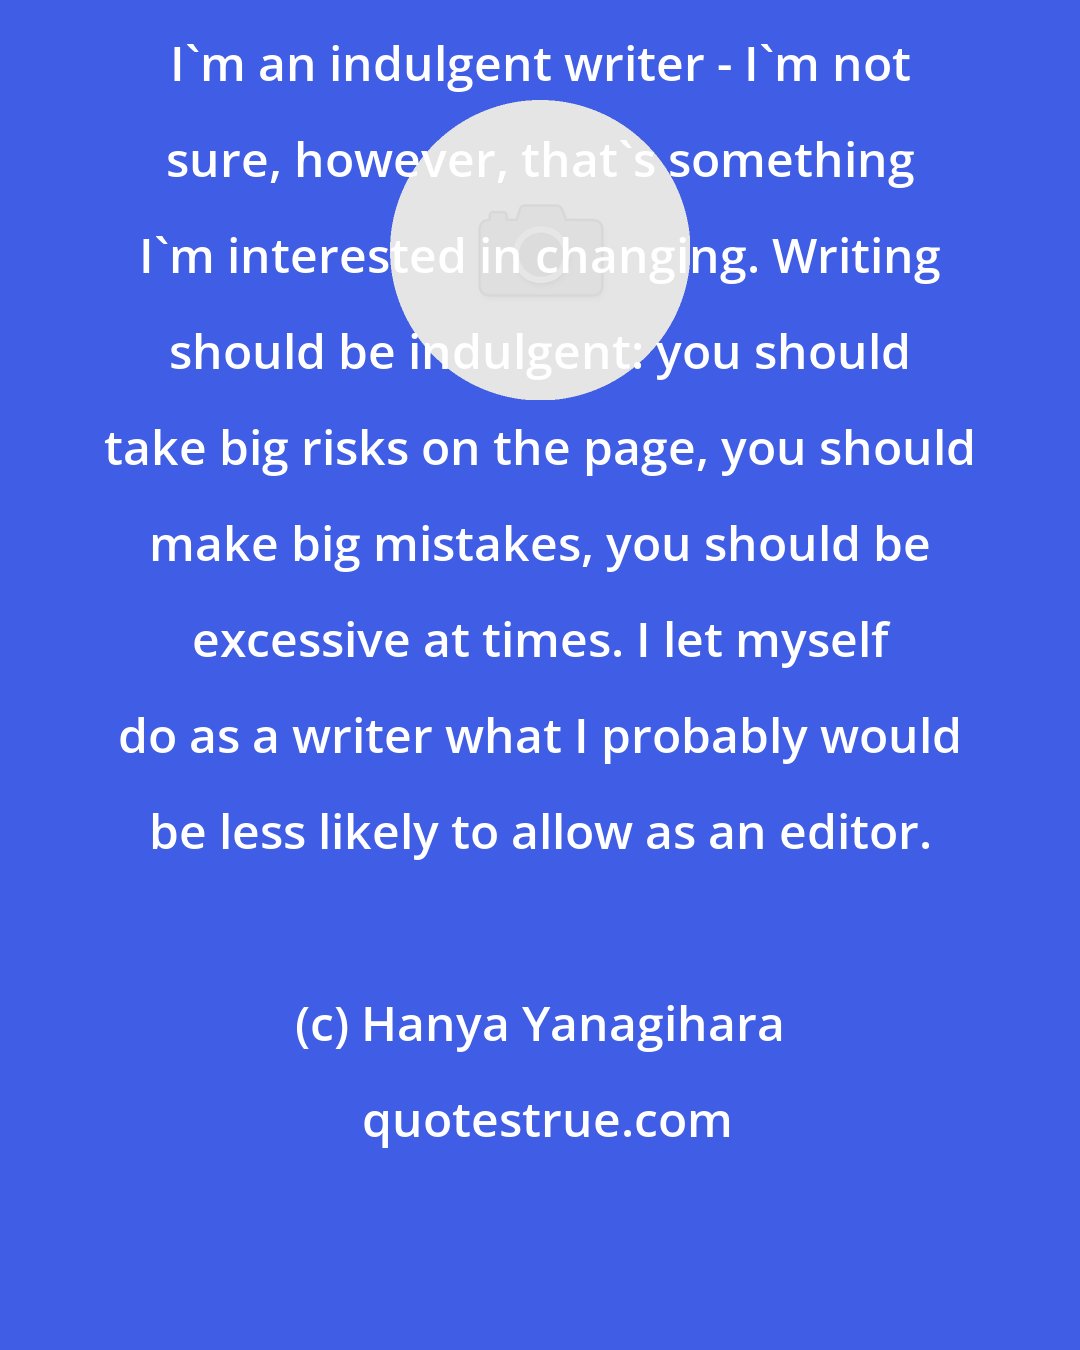 Hanya Yanagihara: I'm an indulgent writer - I'm not sure, however, that's something I'm interested in changing. Writing should be indulgent: you should take big risks on the page, you should make big mistakes, you should be excessive at times. I let myself do as a writer what I probably would be less likely to allow as an editor.